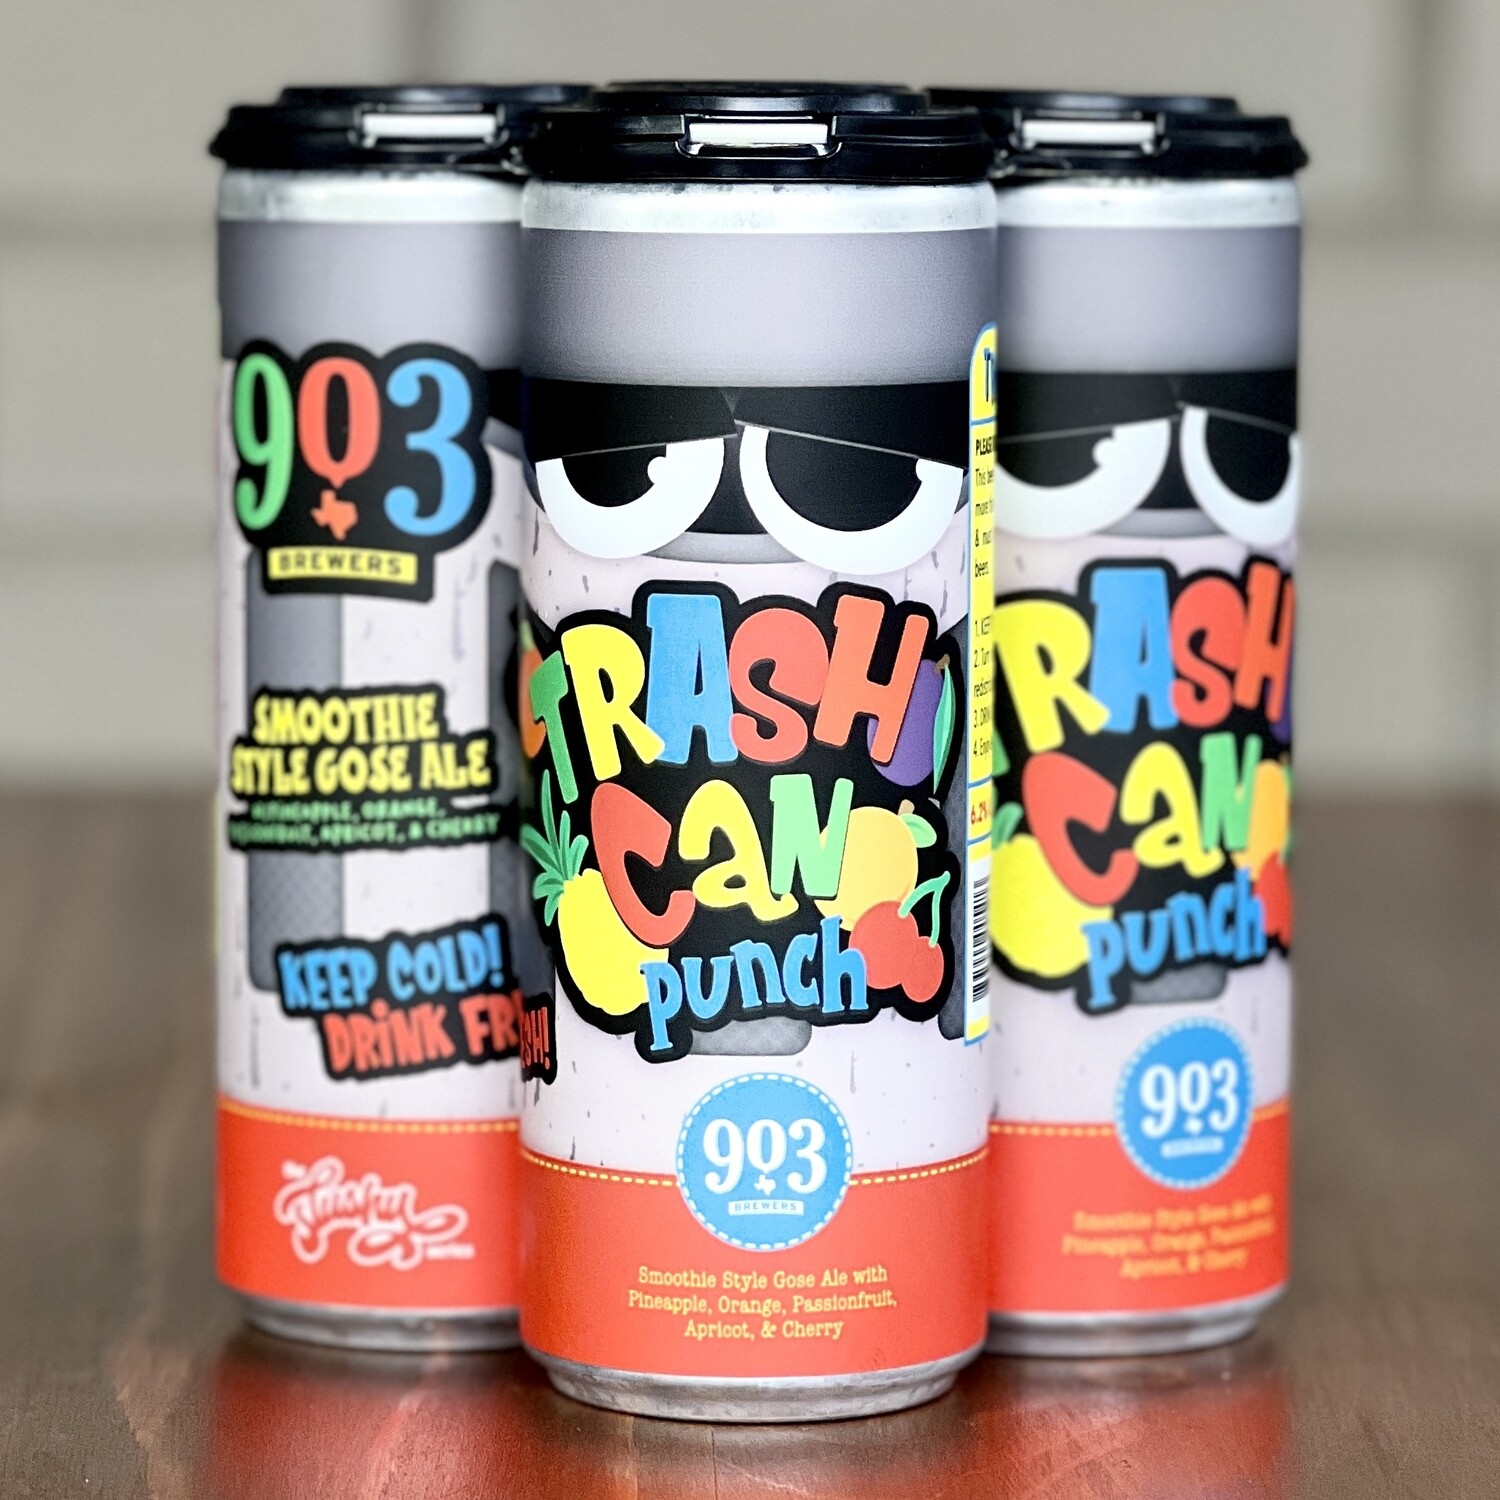 903 Brewers Trash Can Punch (4pk)